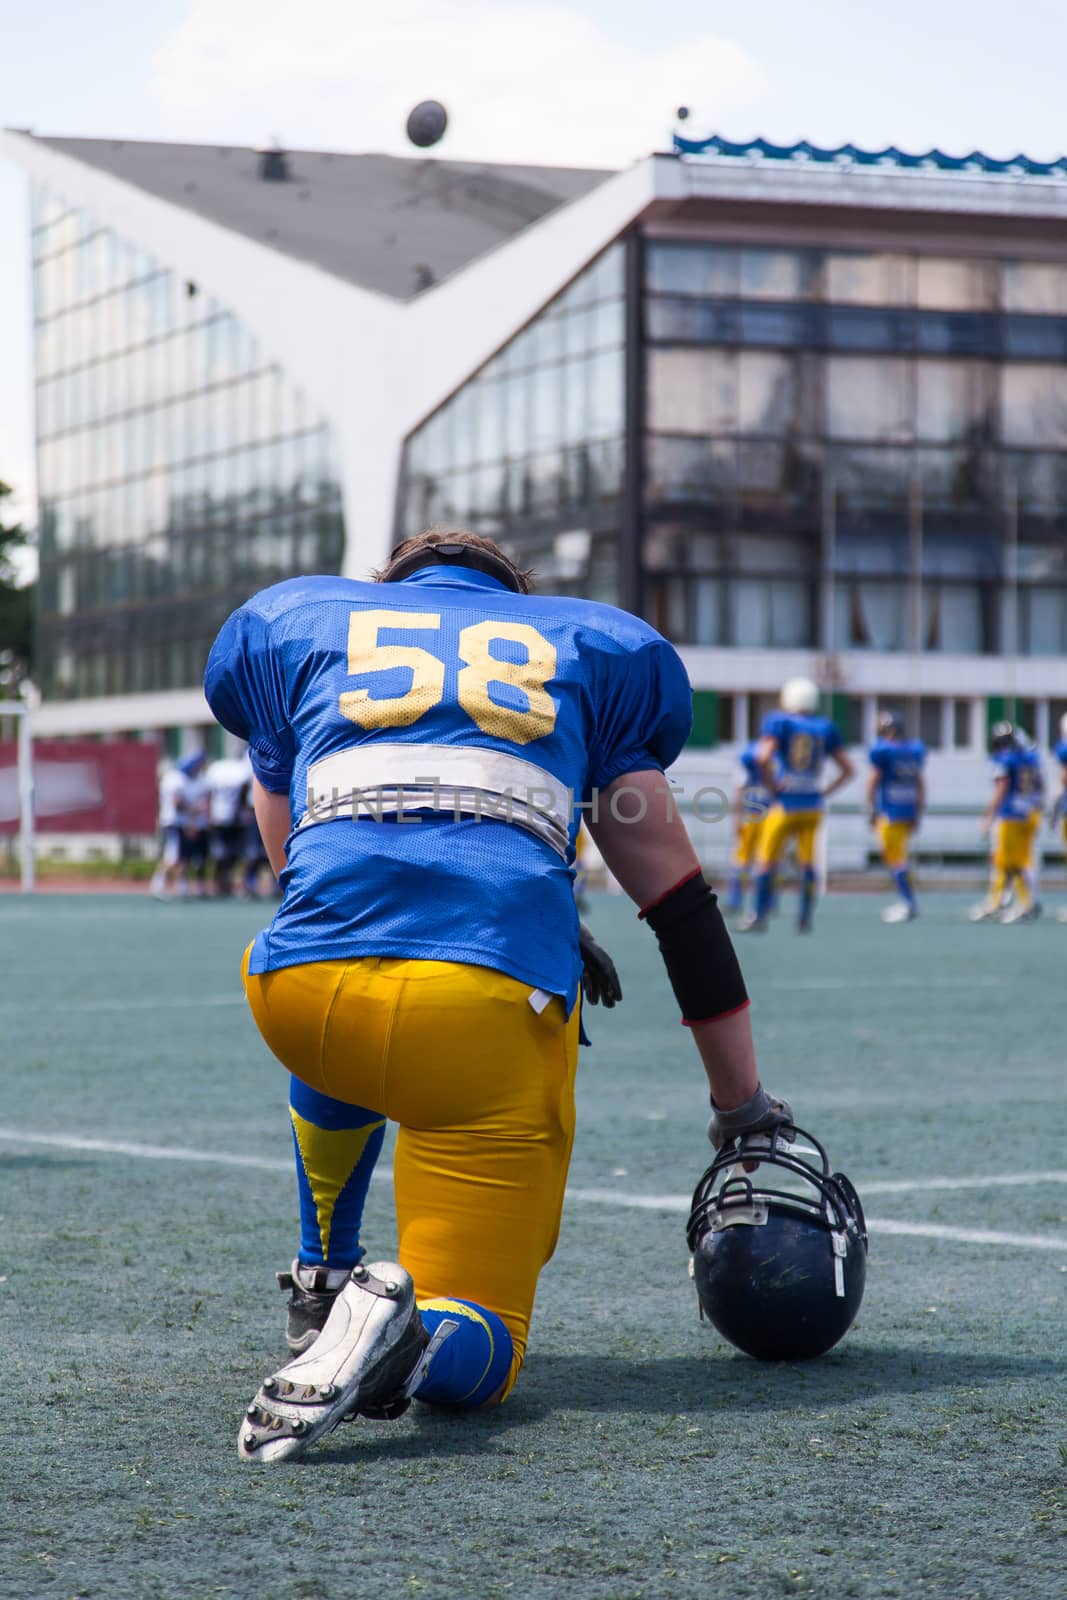 American football player resting during a match